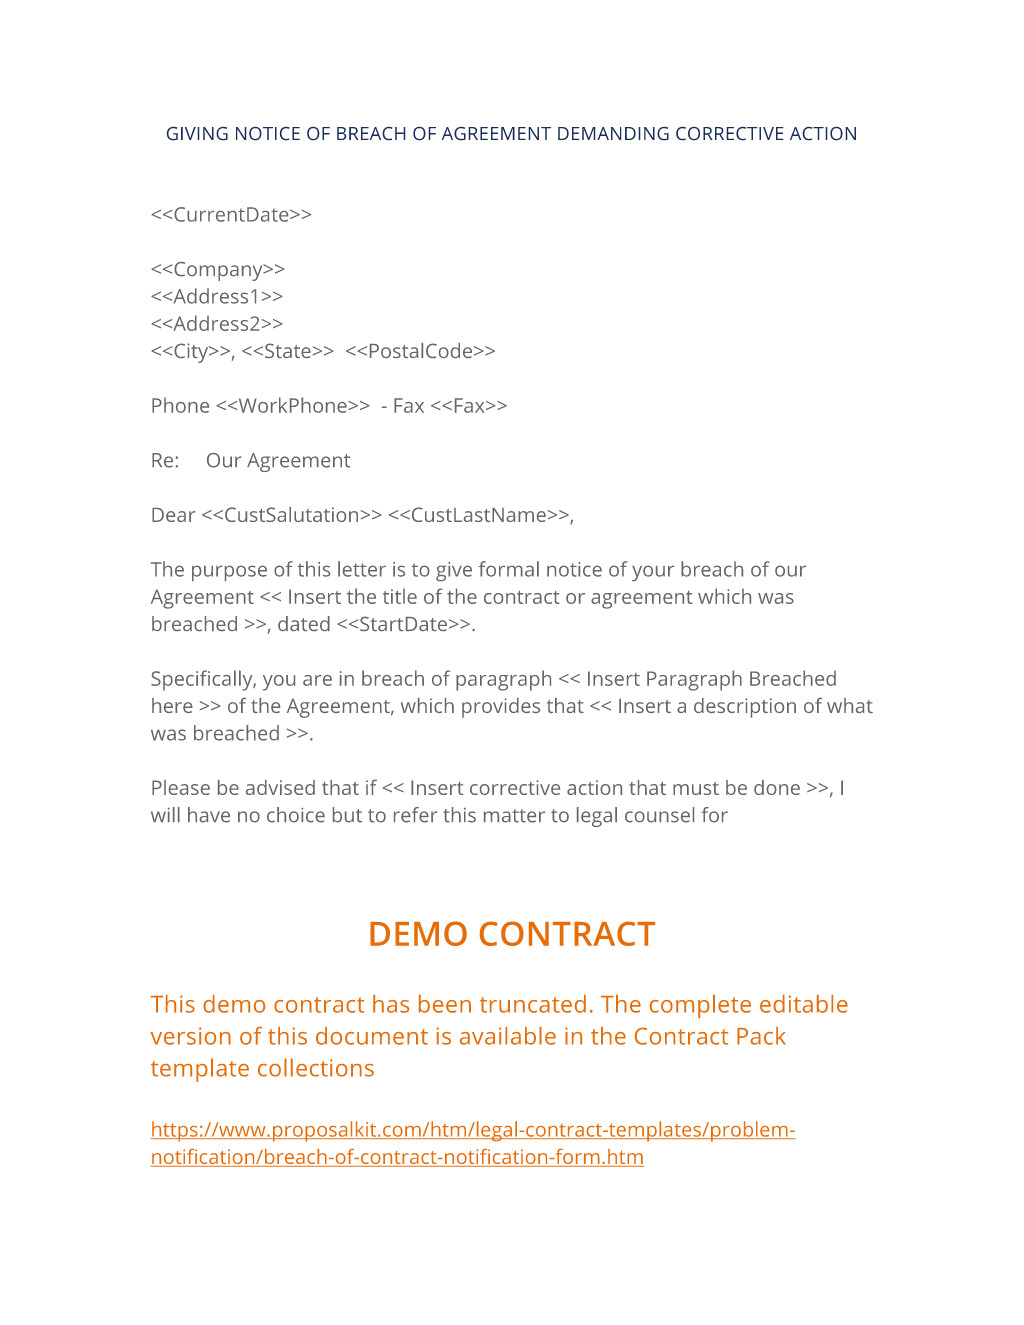 breach of contract notification form